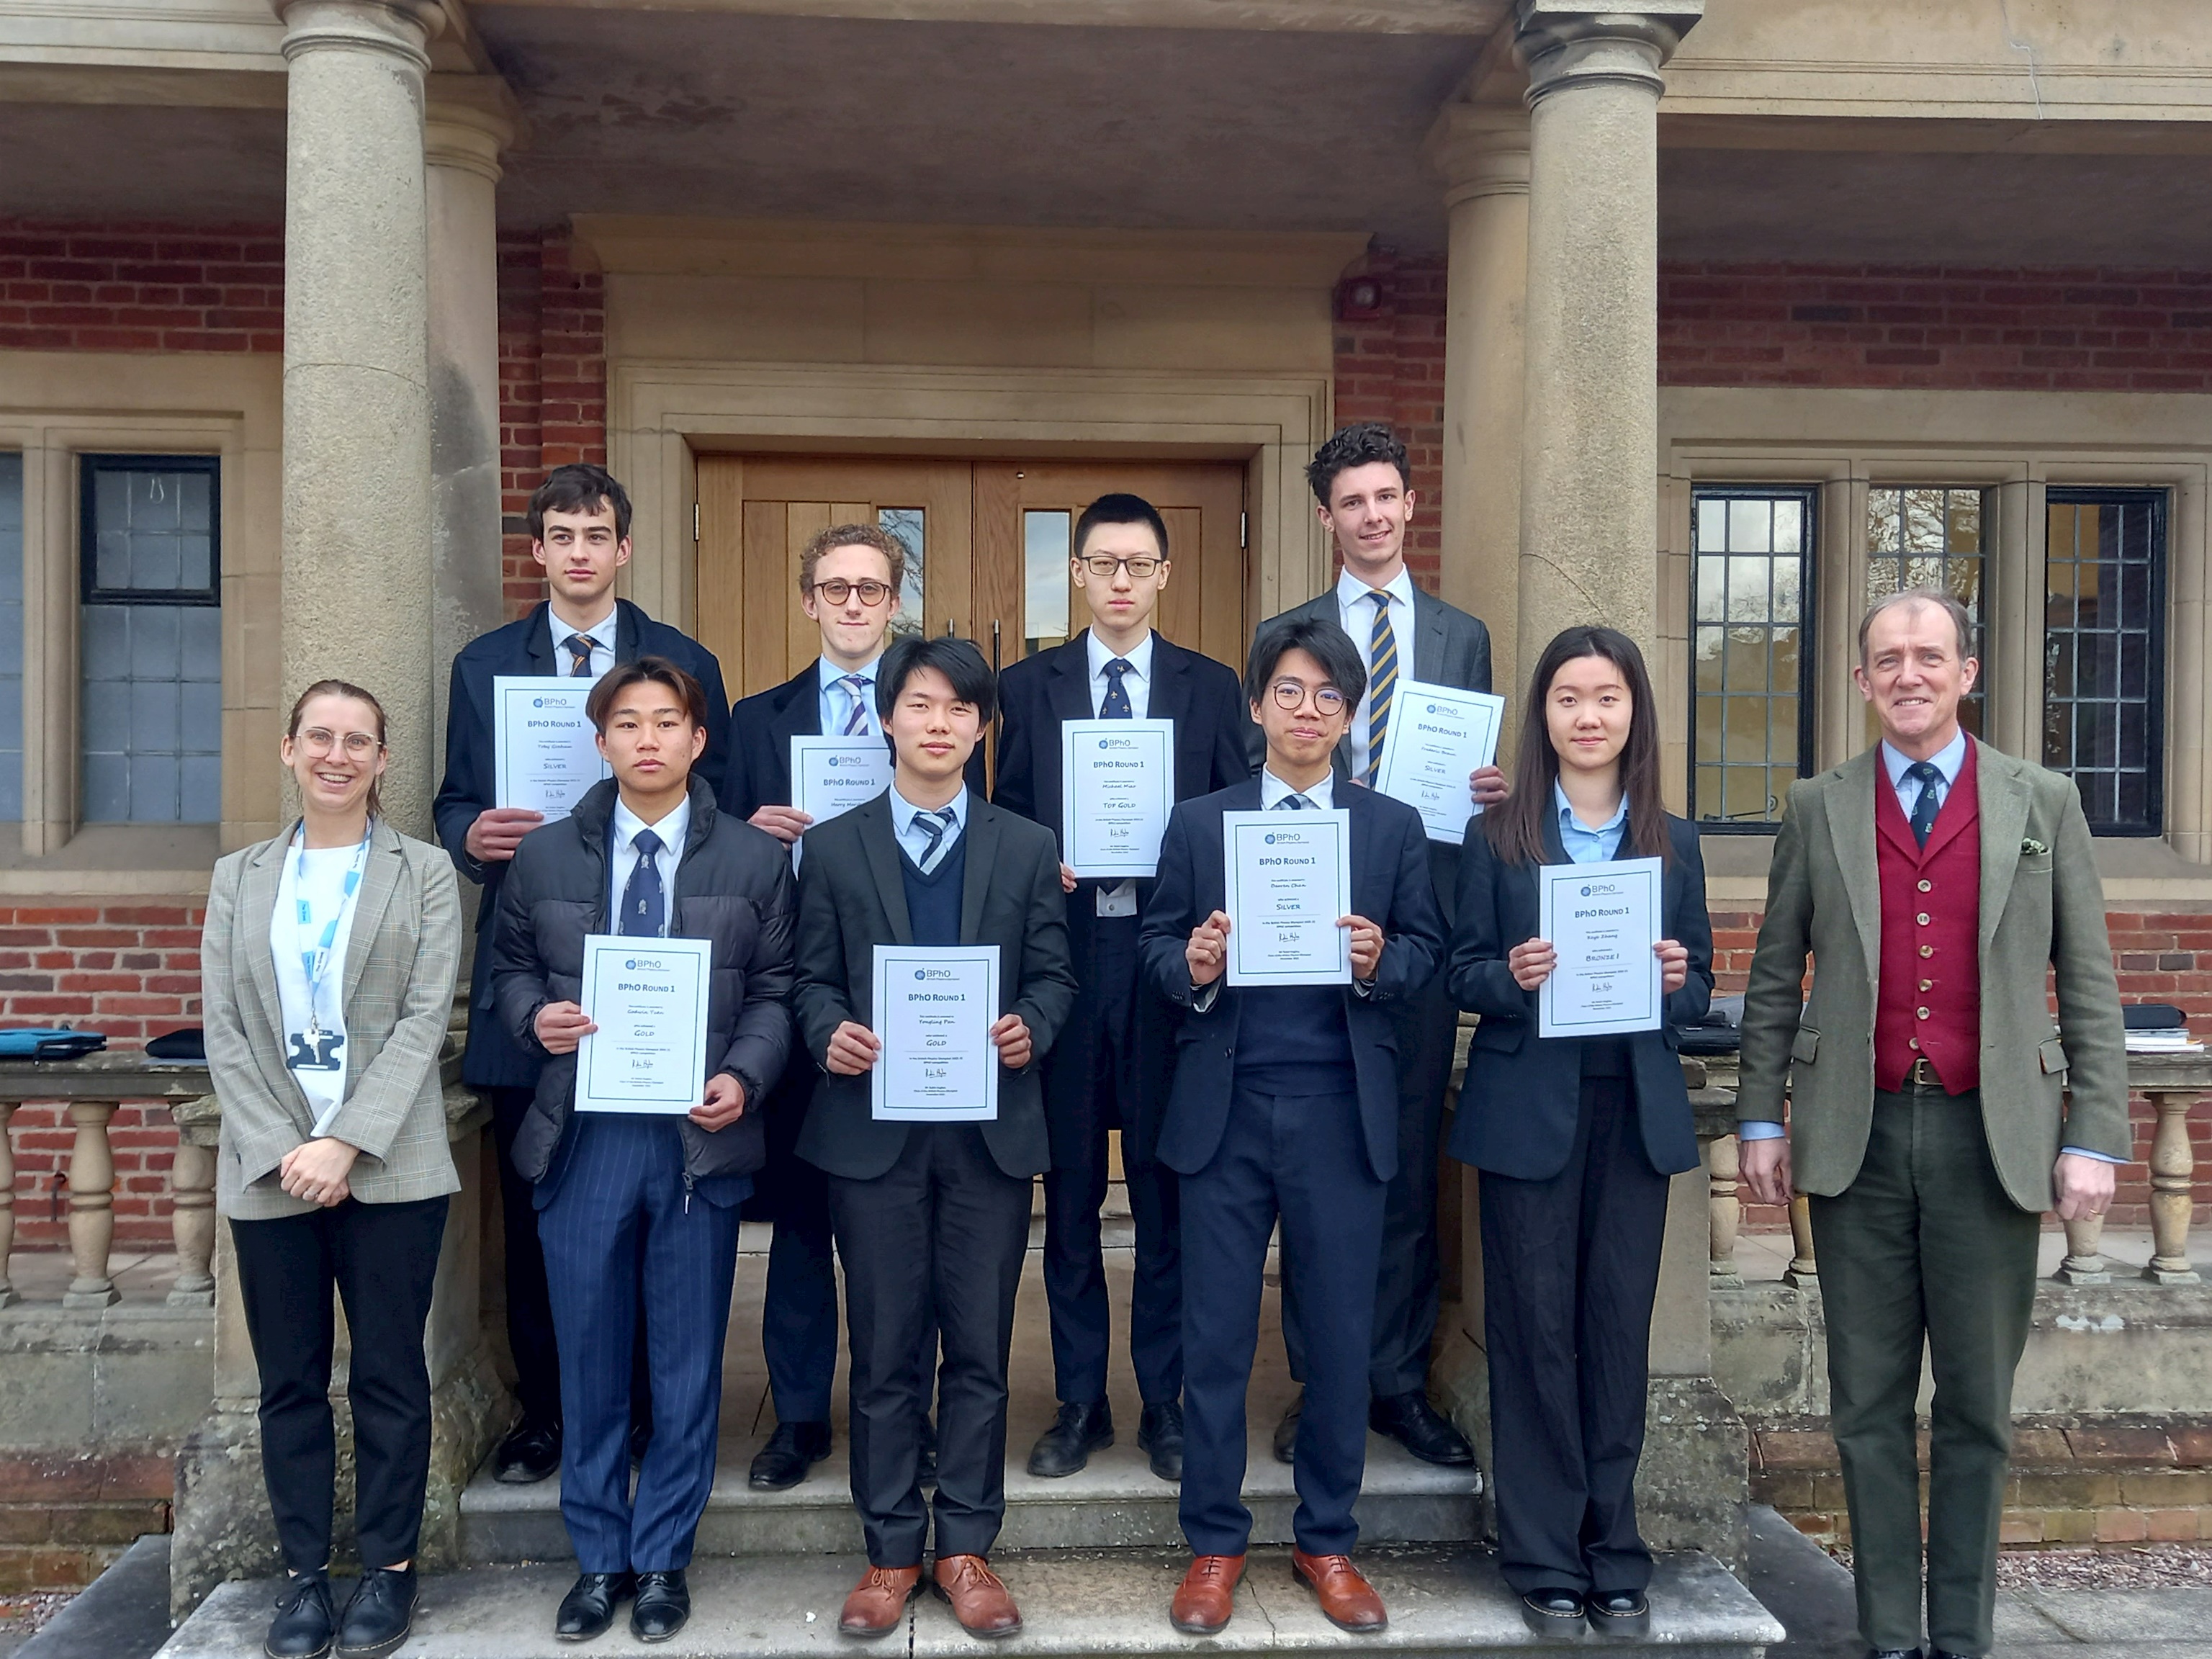 Top results for Shrewsbury students in national Physics competitions